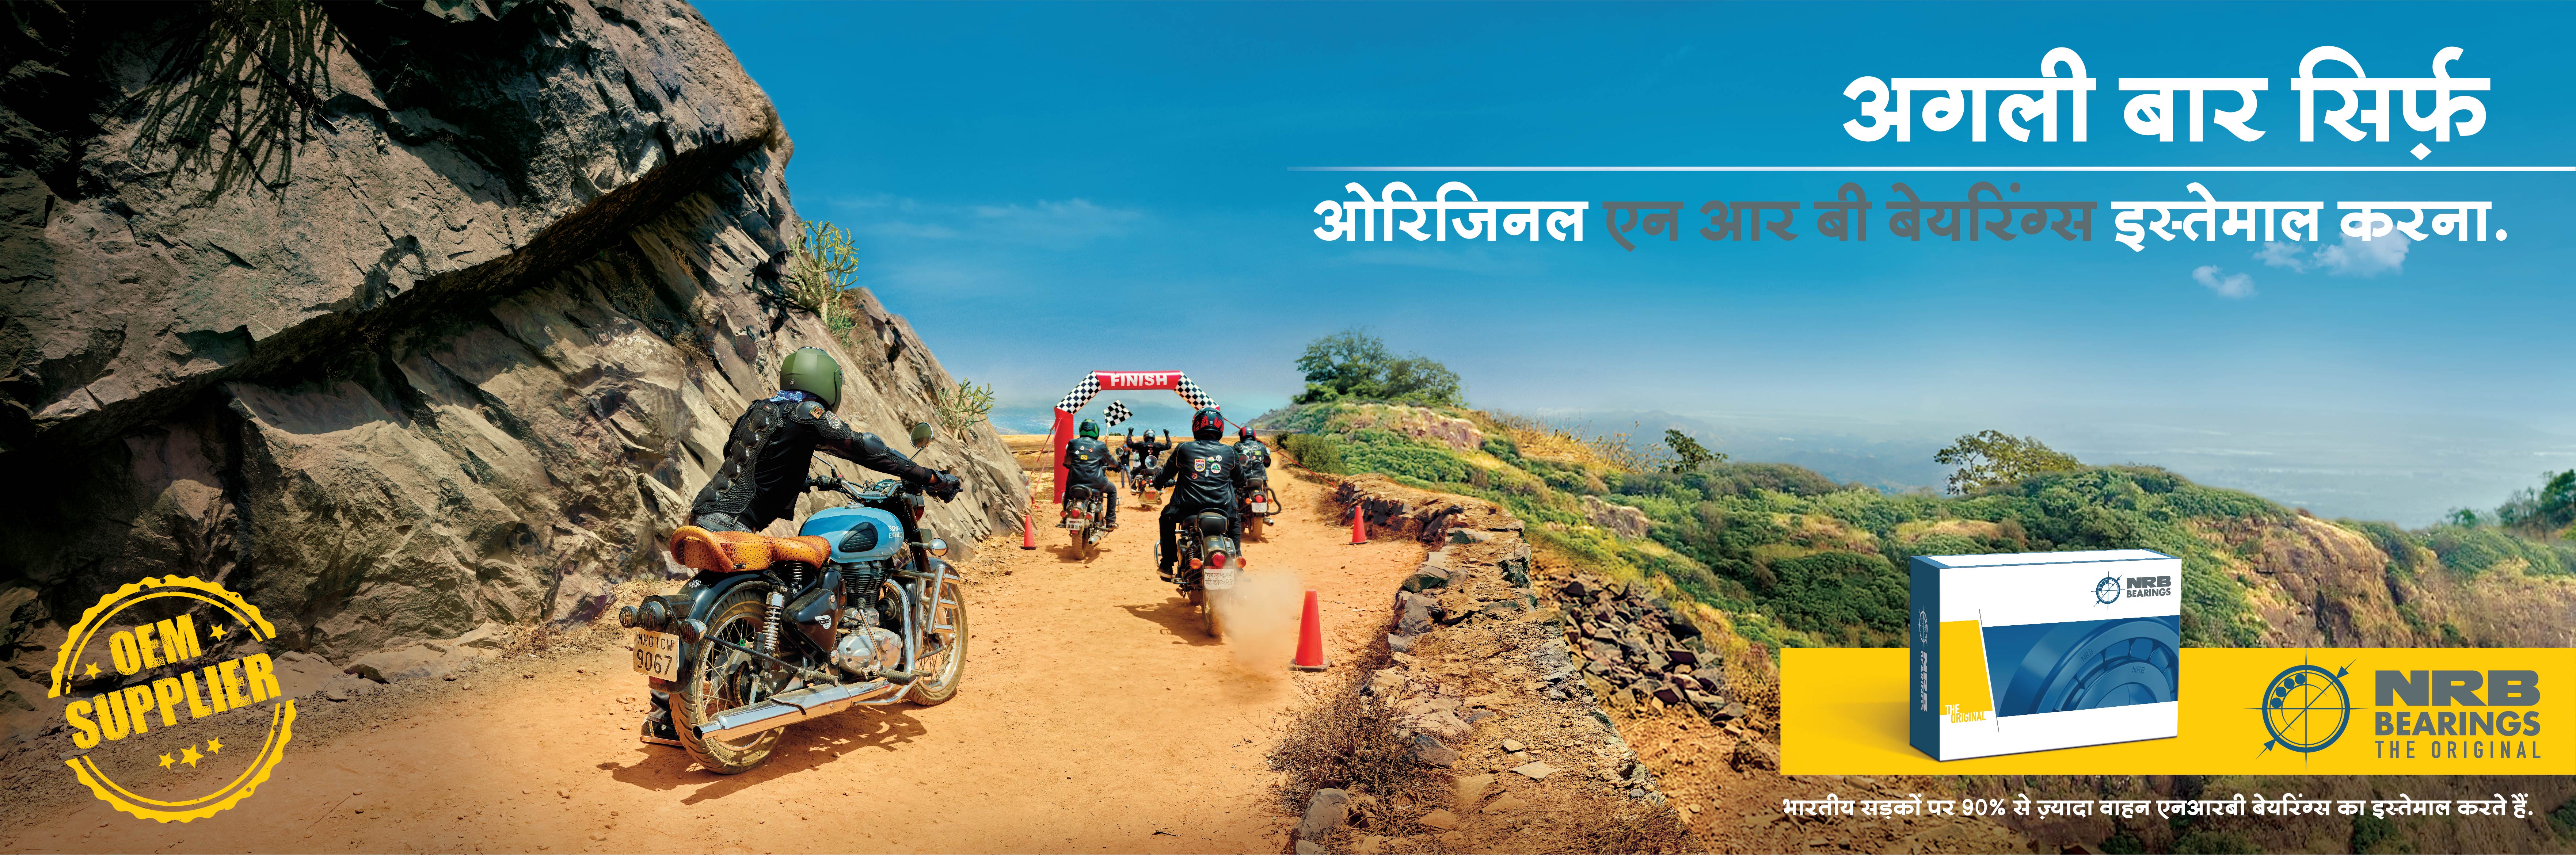 Bike mountain rally NRB Ad. shot by professional photographer